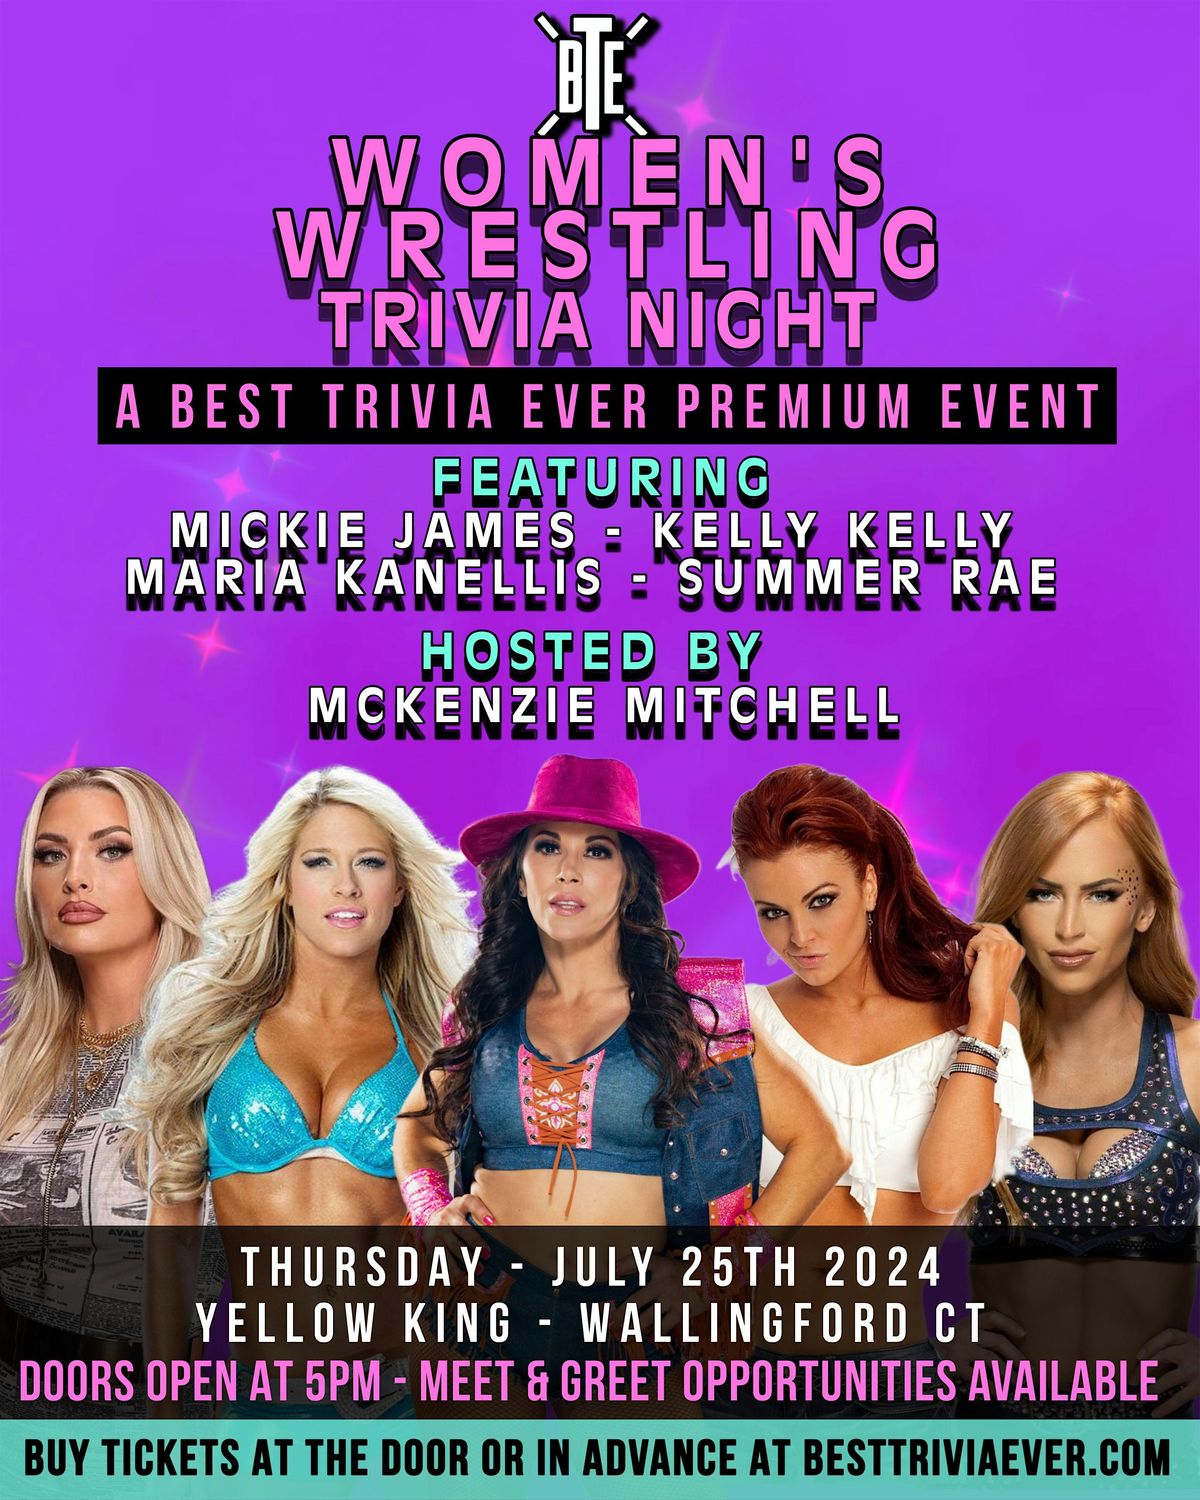 Women's Wrestling Trivia Night presented by Best Trivia Ever